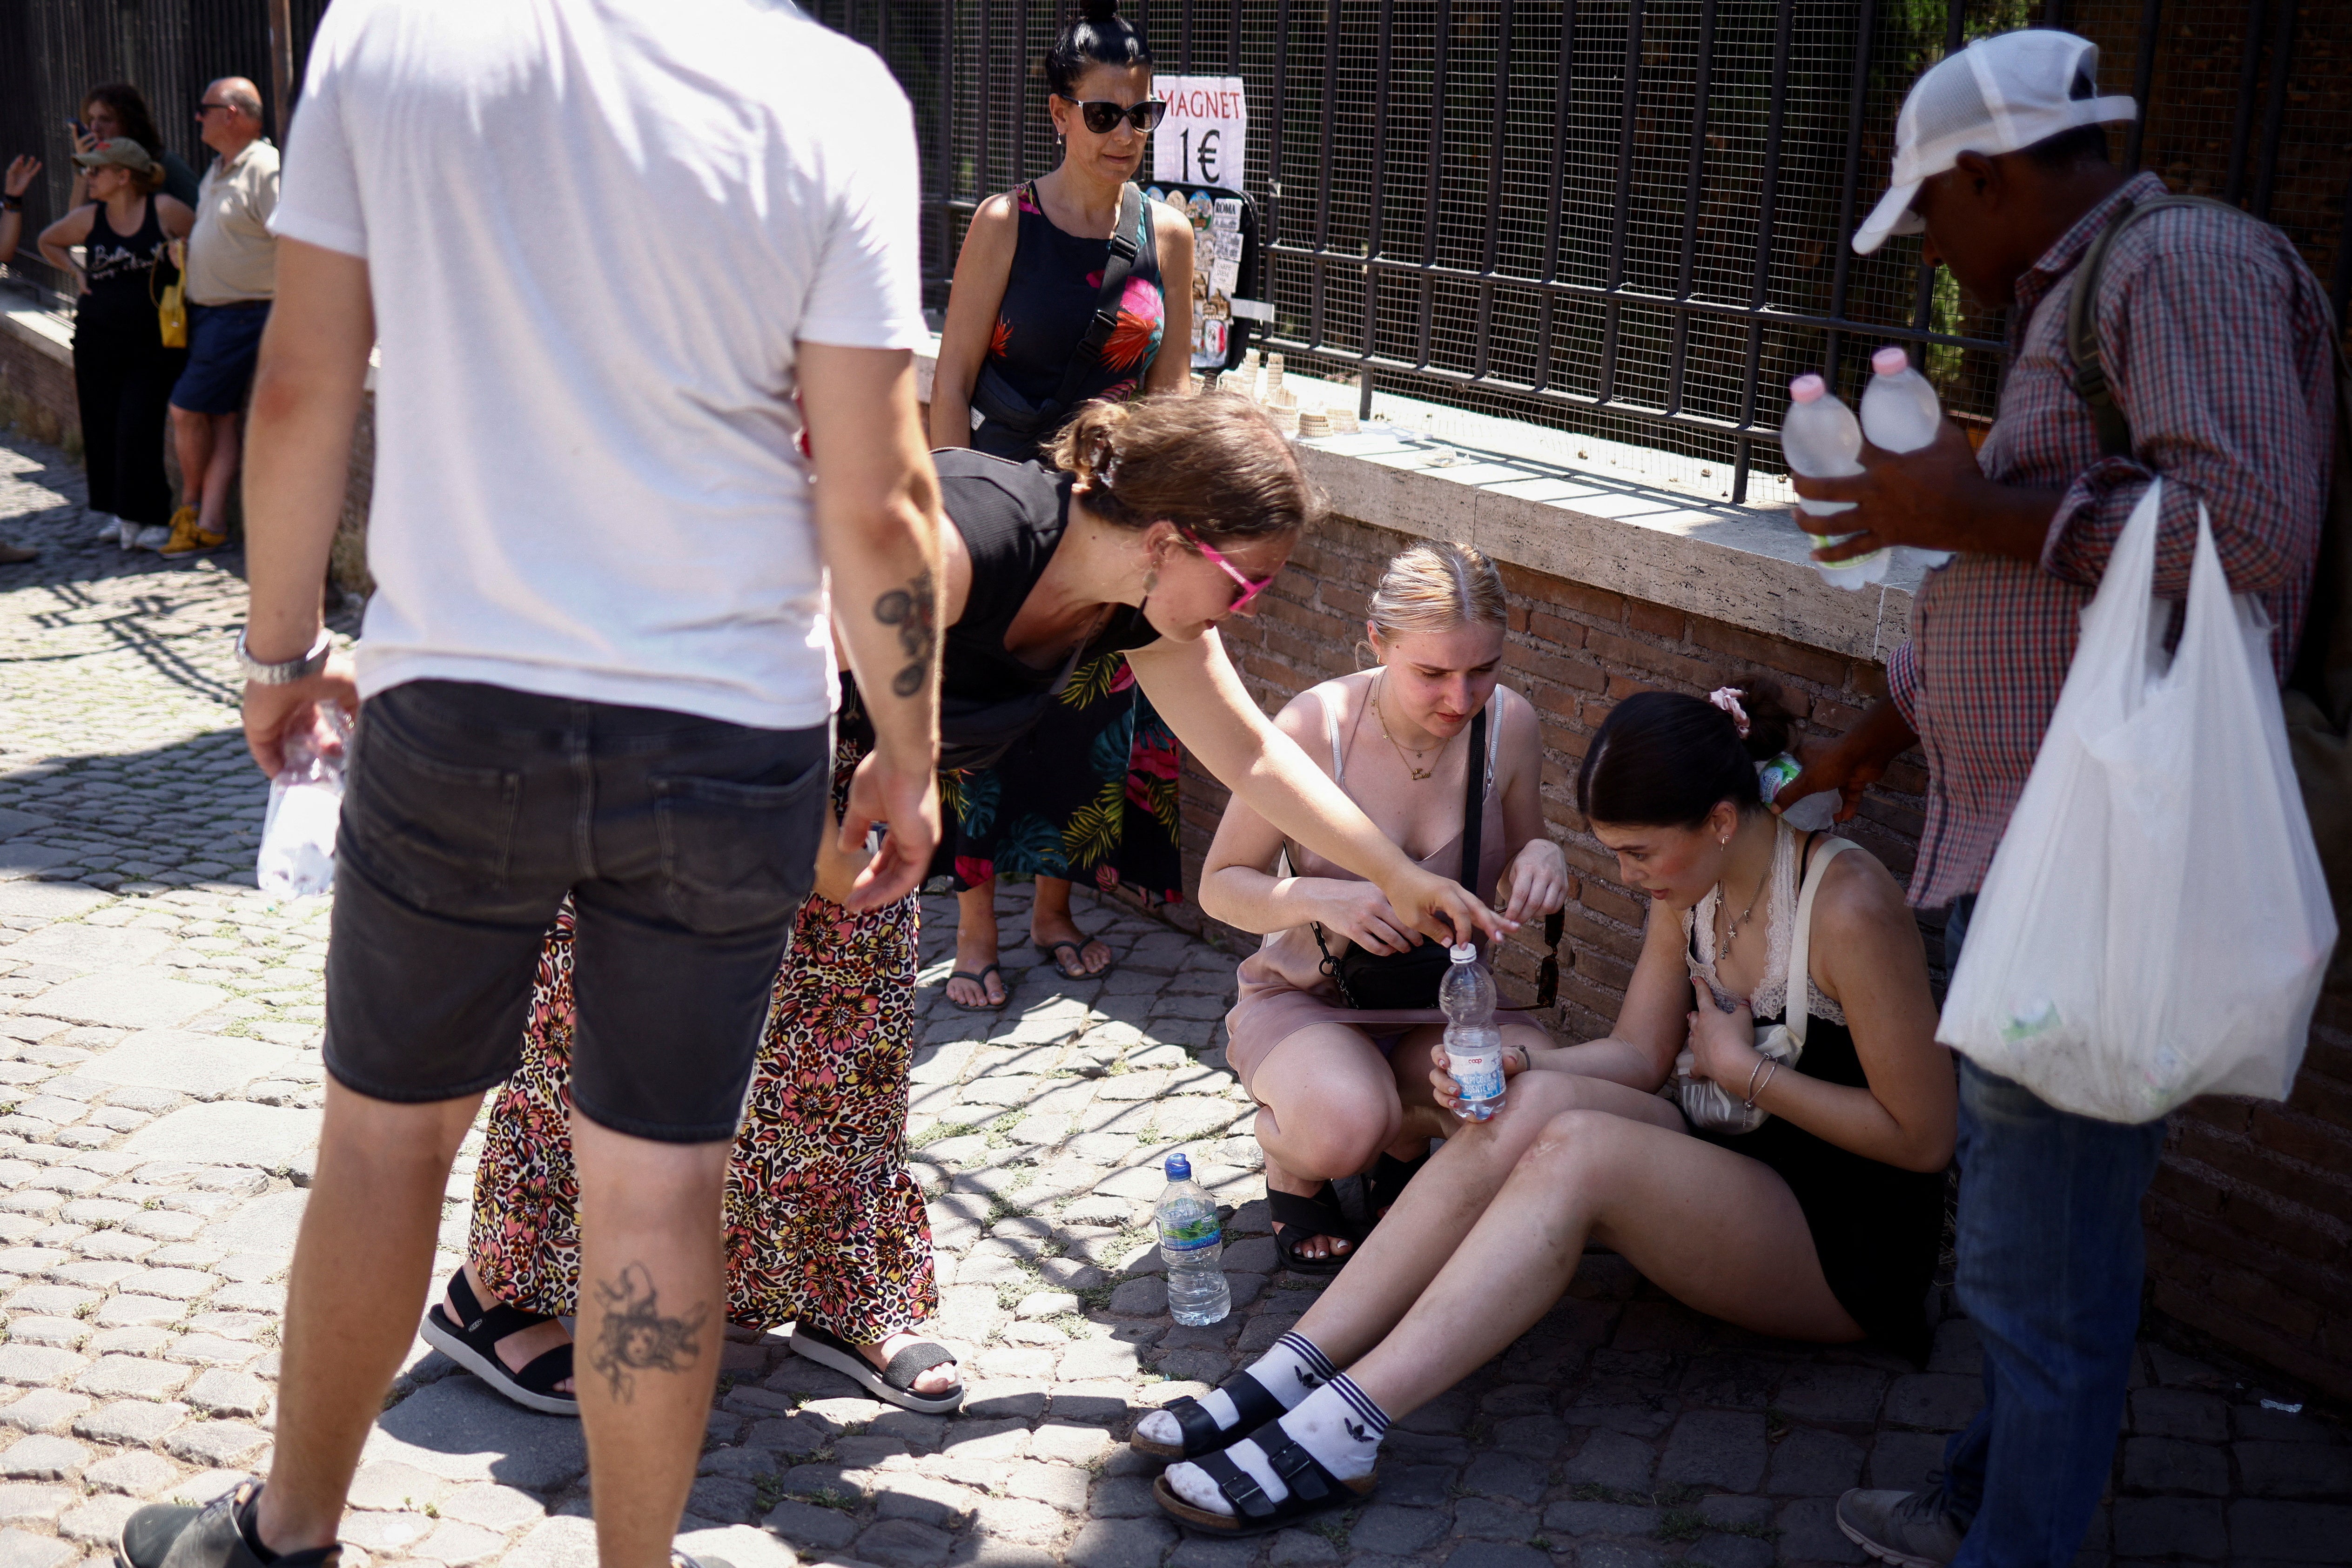 A tourist from the UK receives help near the Colosseum after fainting during a heatwave across Italy